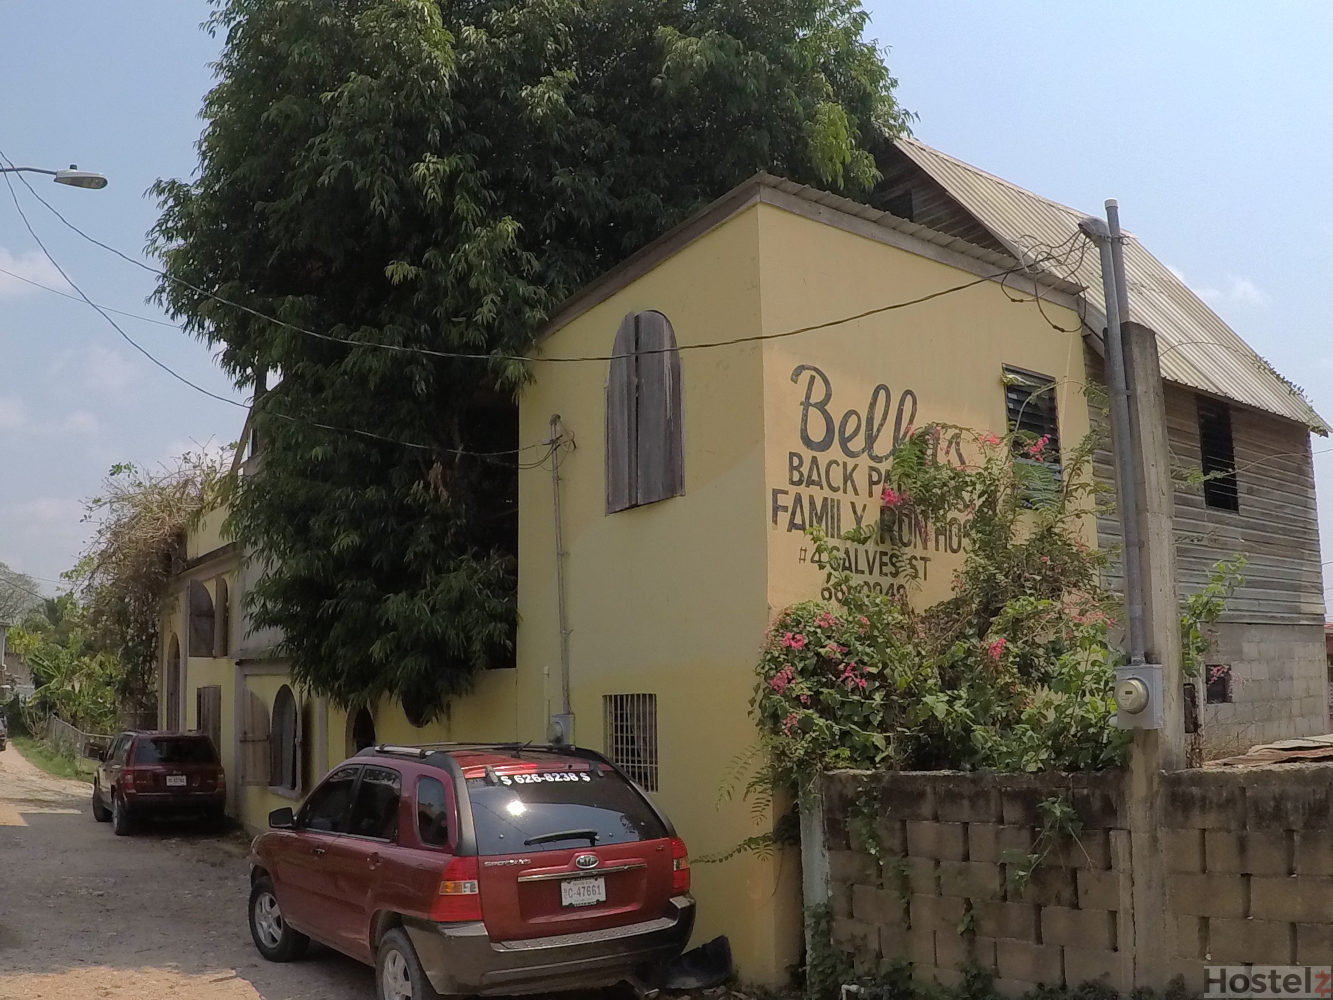 Streetview of Bella's Backpackers when coming from the main road